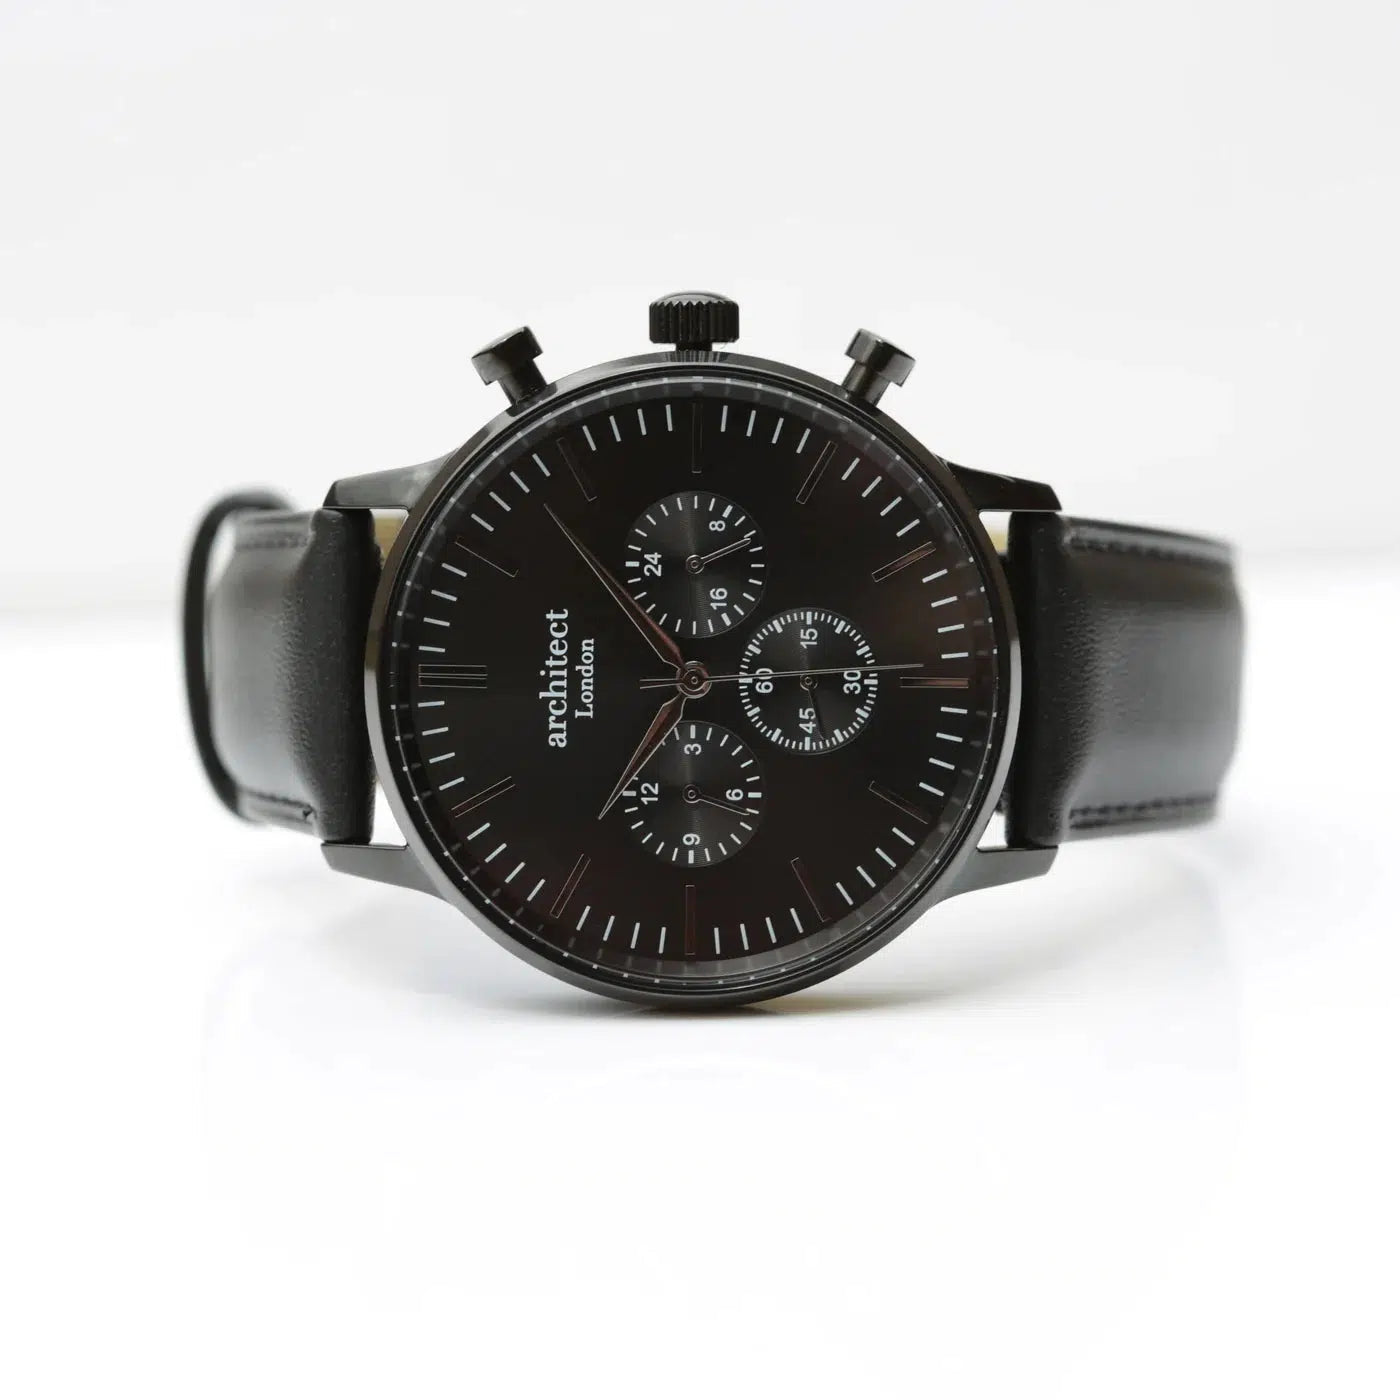 Architect Motivator - Men's Personalised watch with Black Leather Strap-NEVANNA